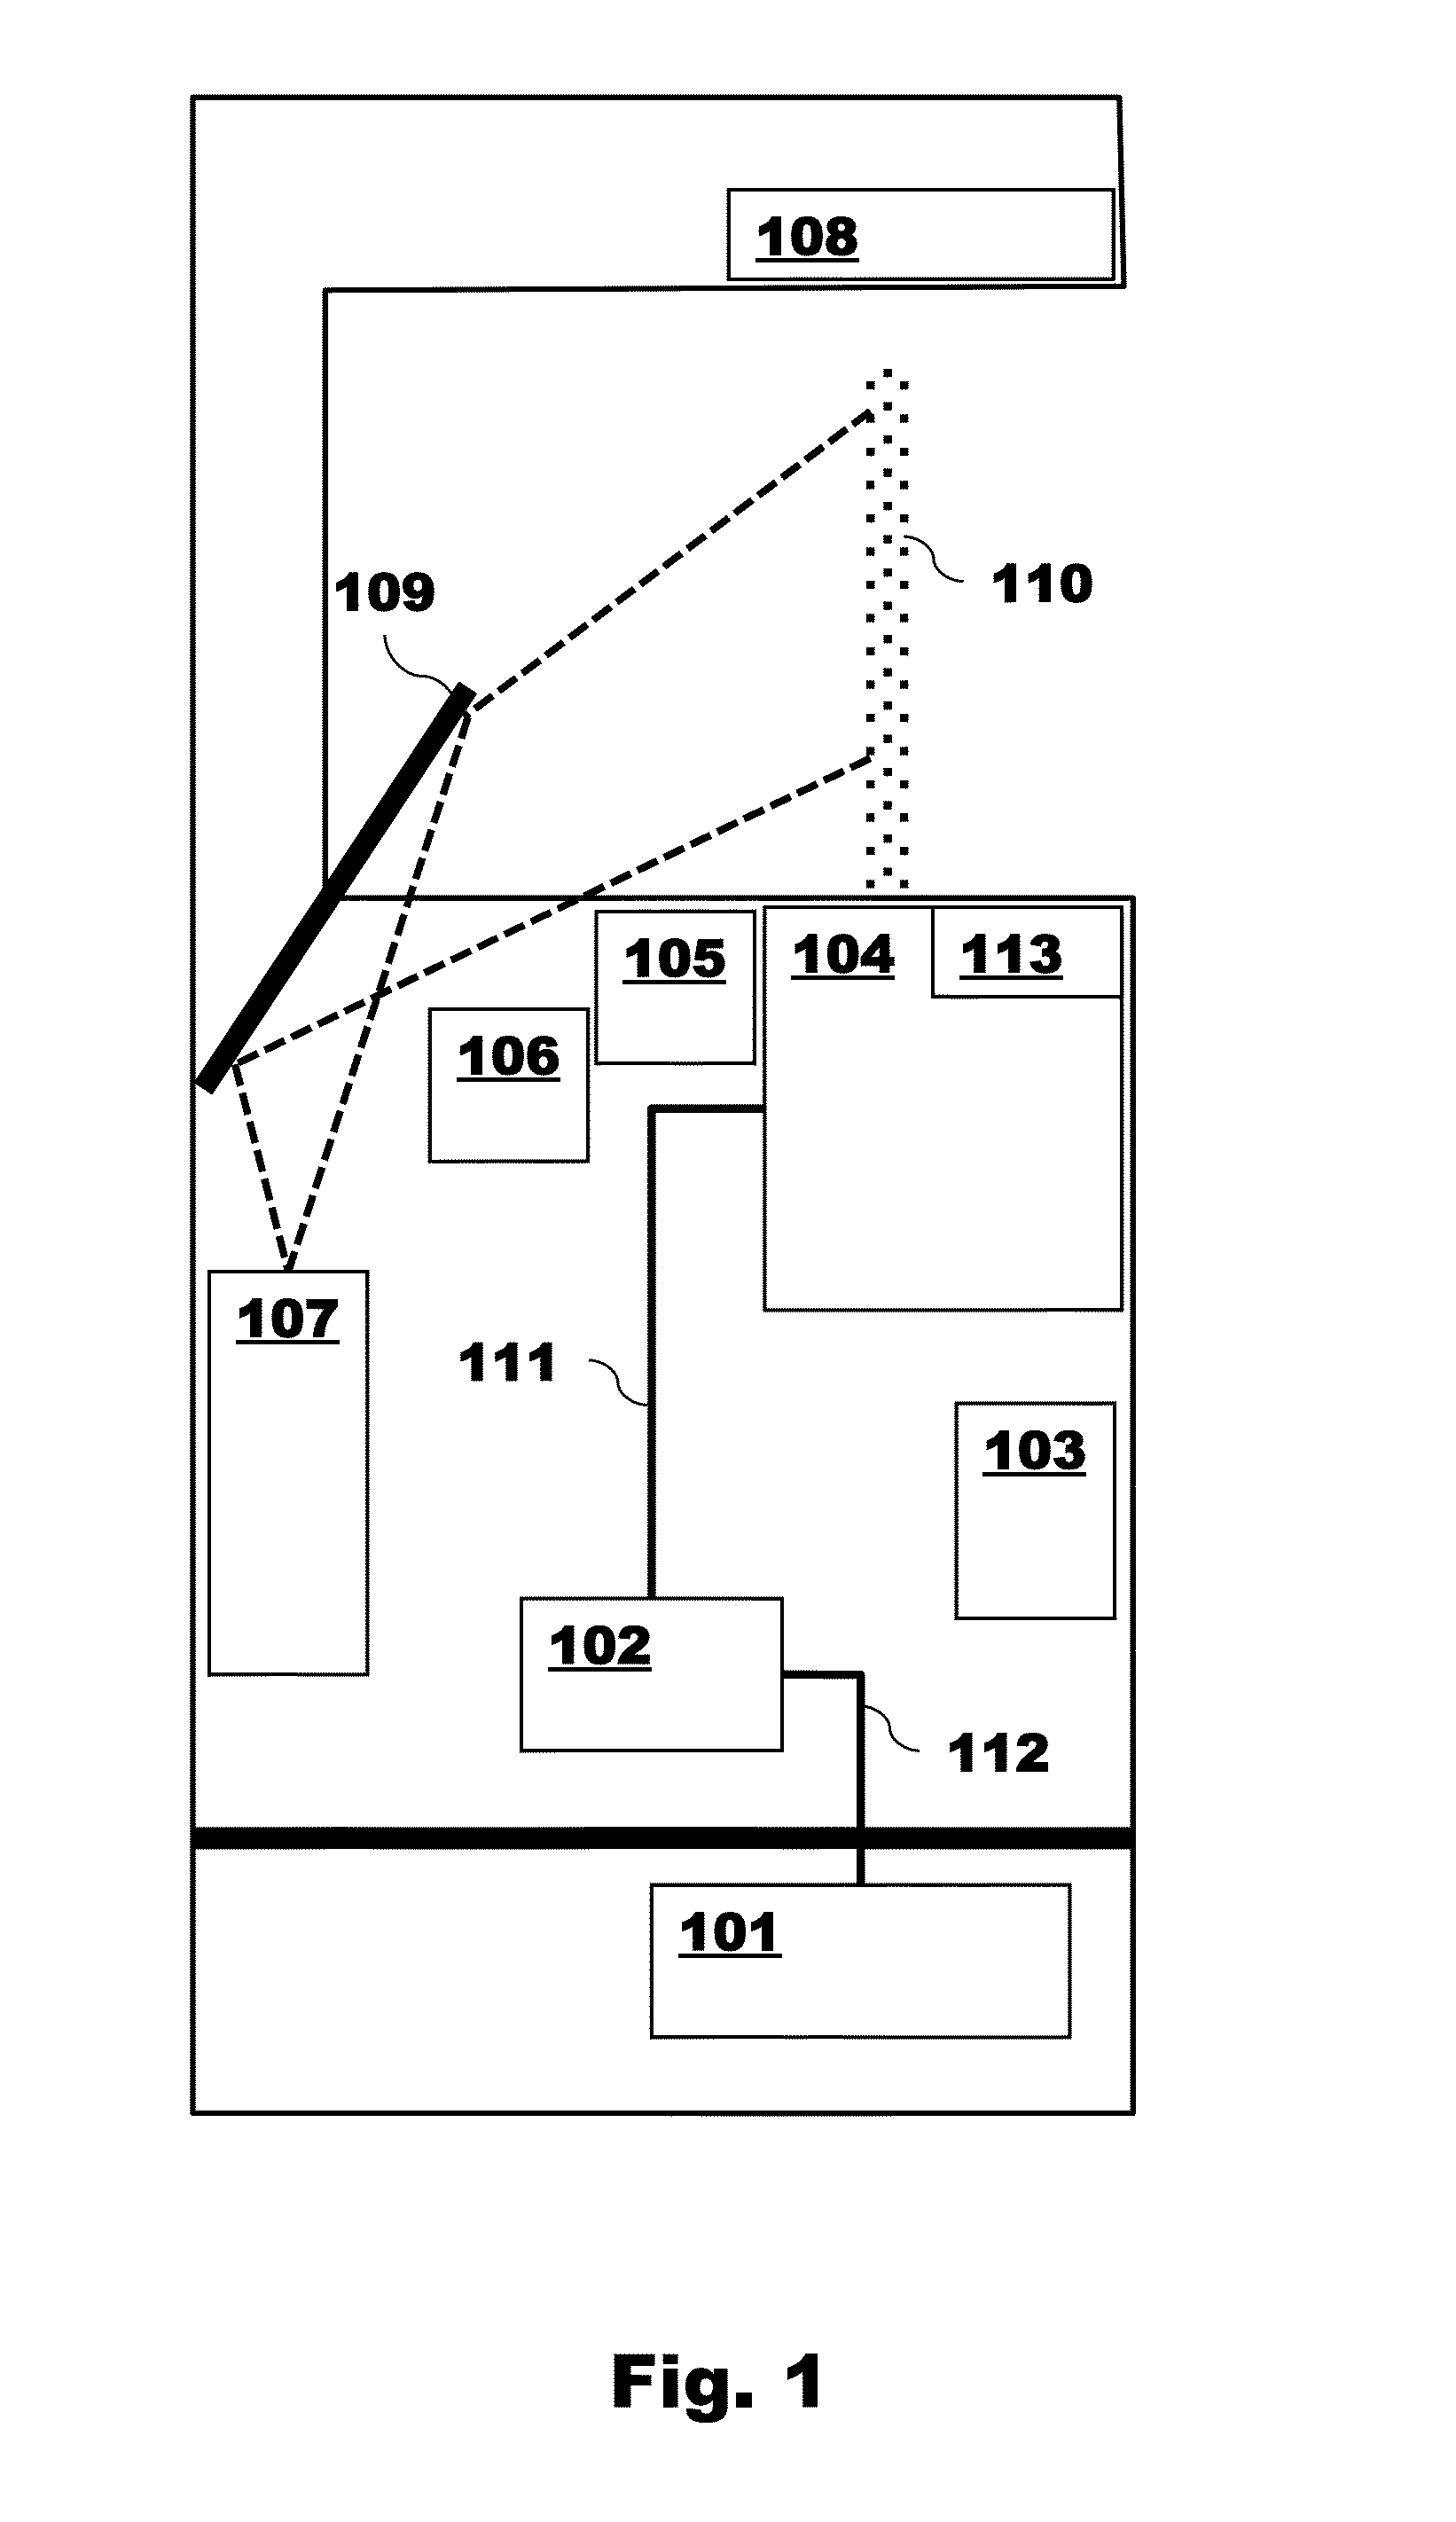 Projection display device with vapor medium screen